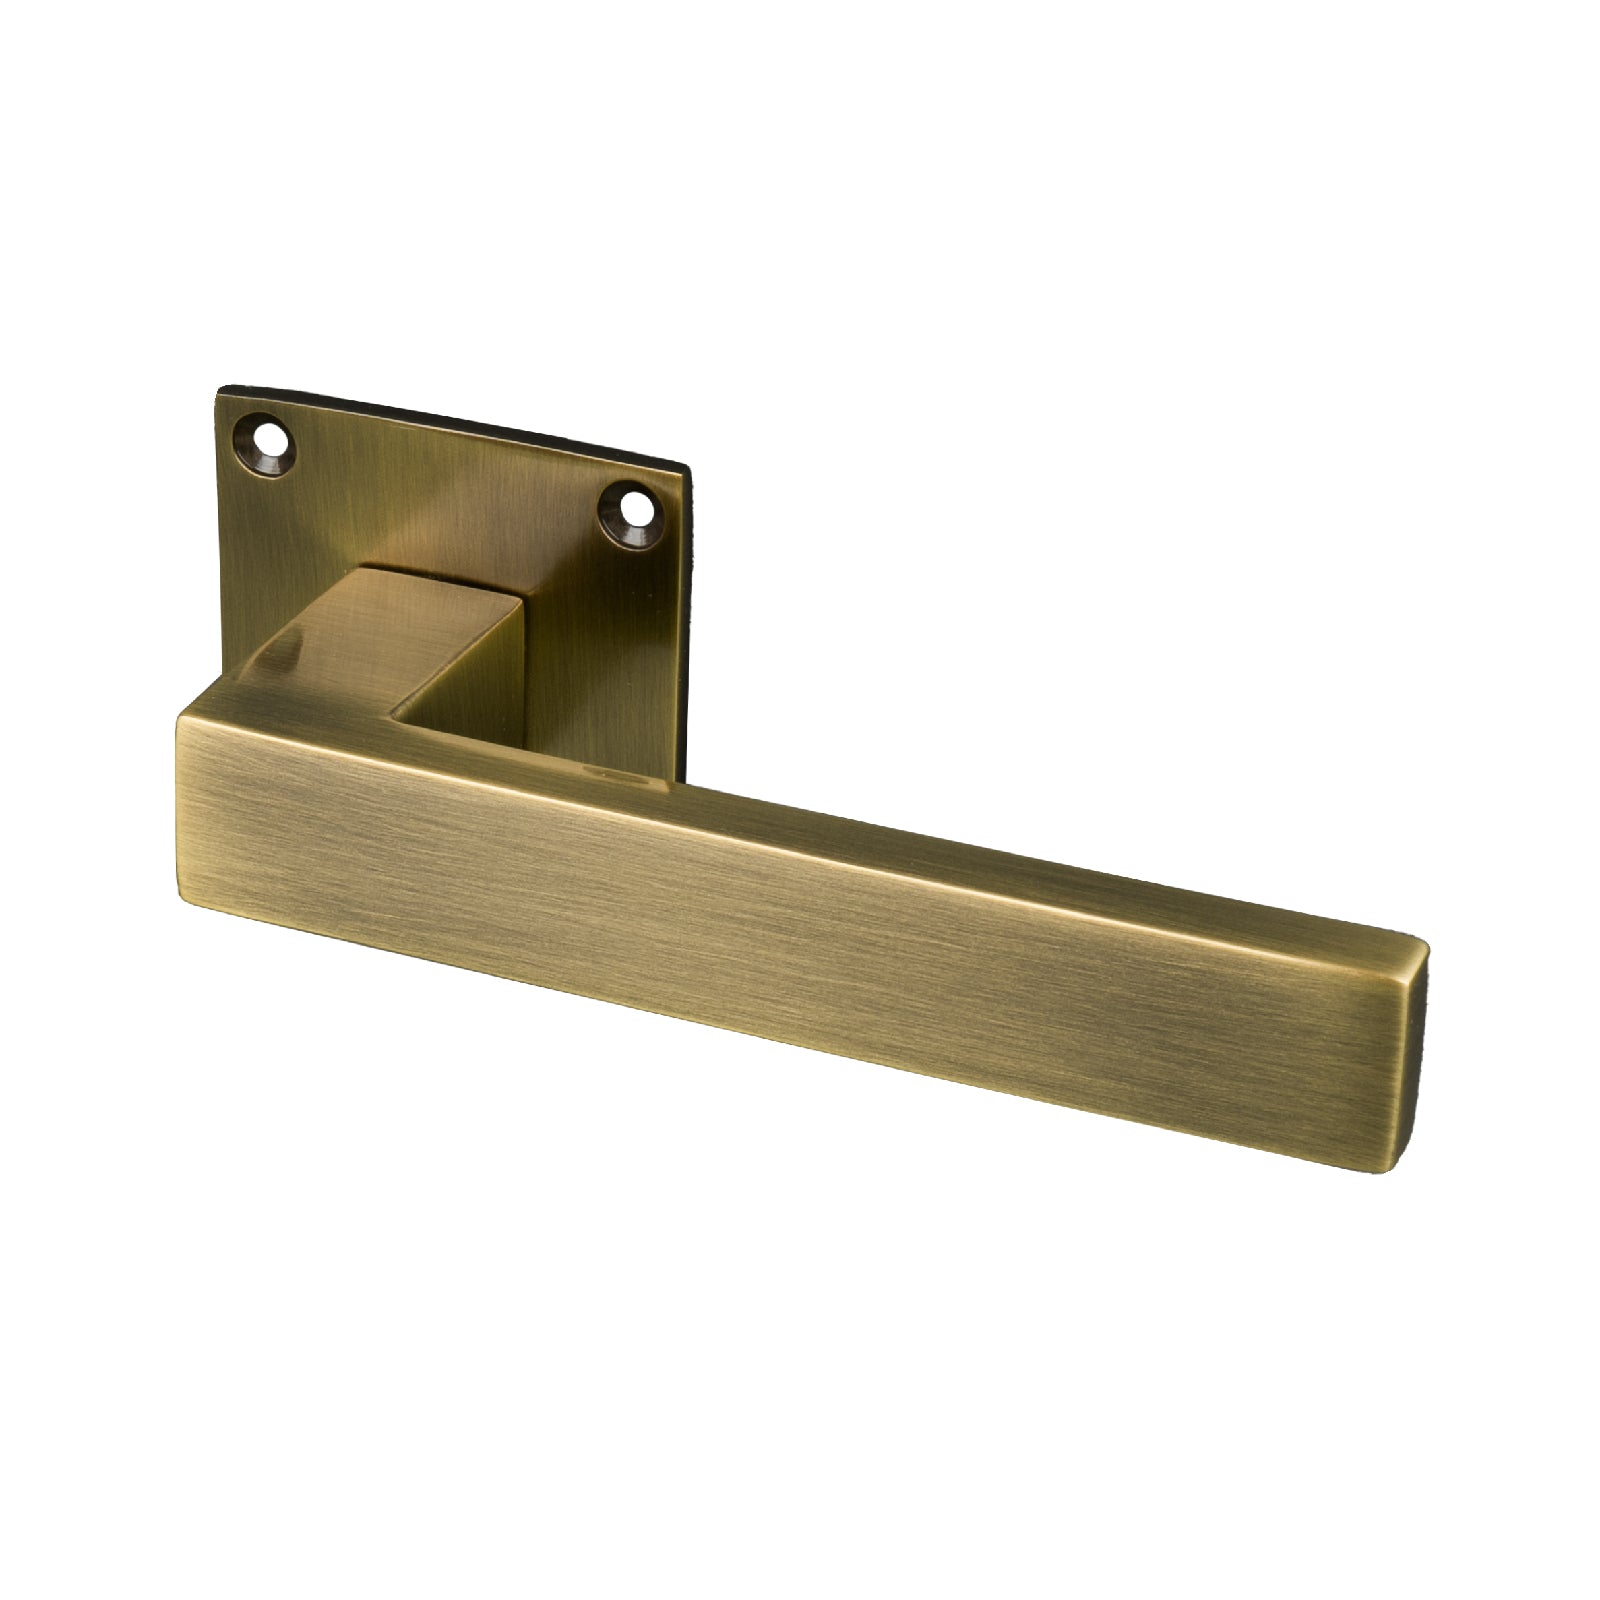 aged brass low profile door handle, lever on rose SHOW